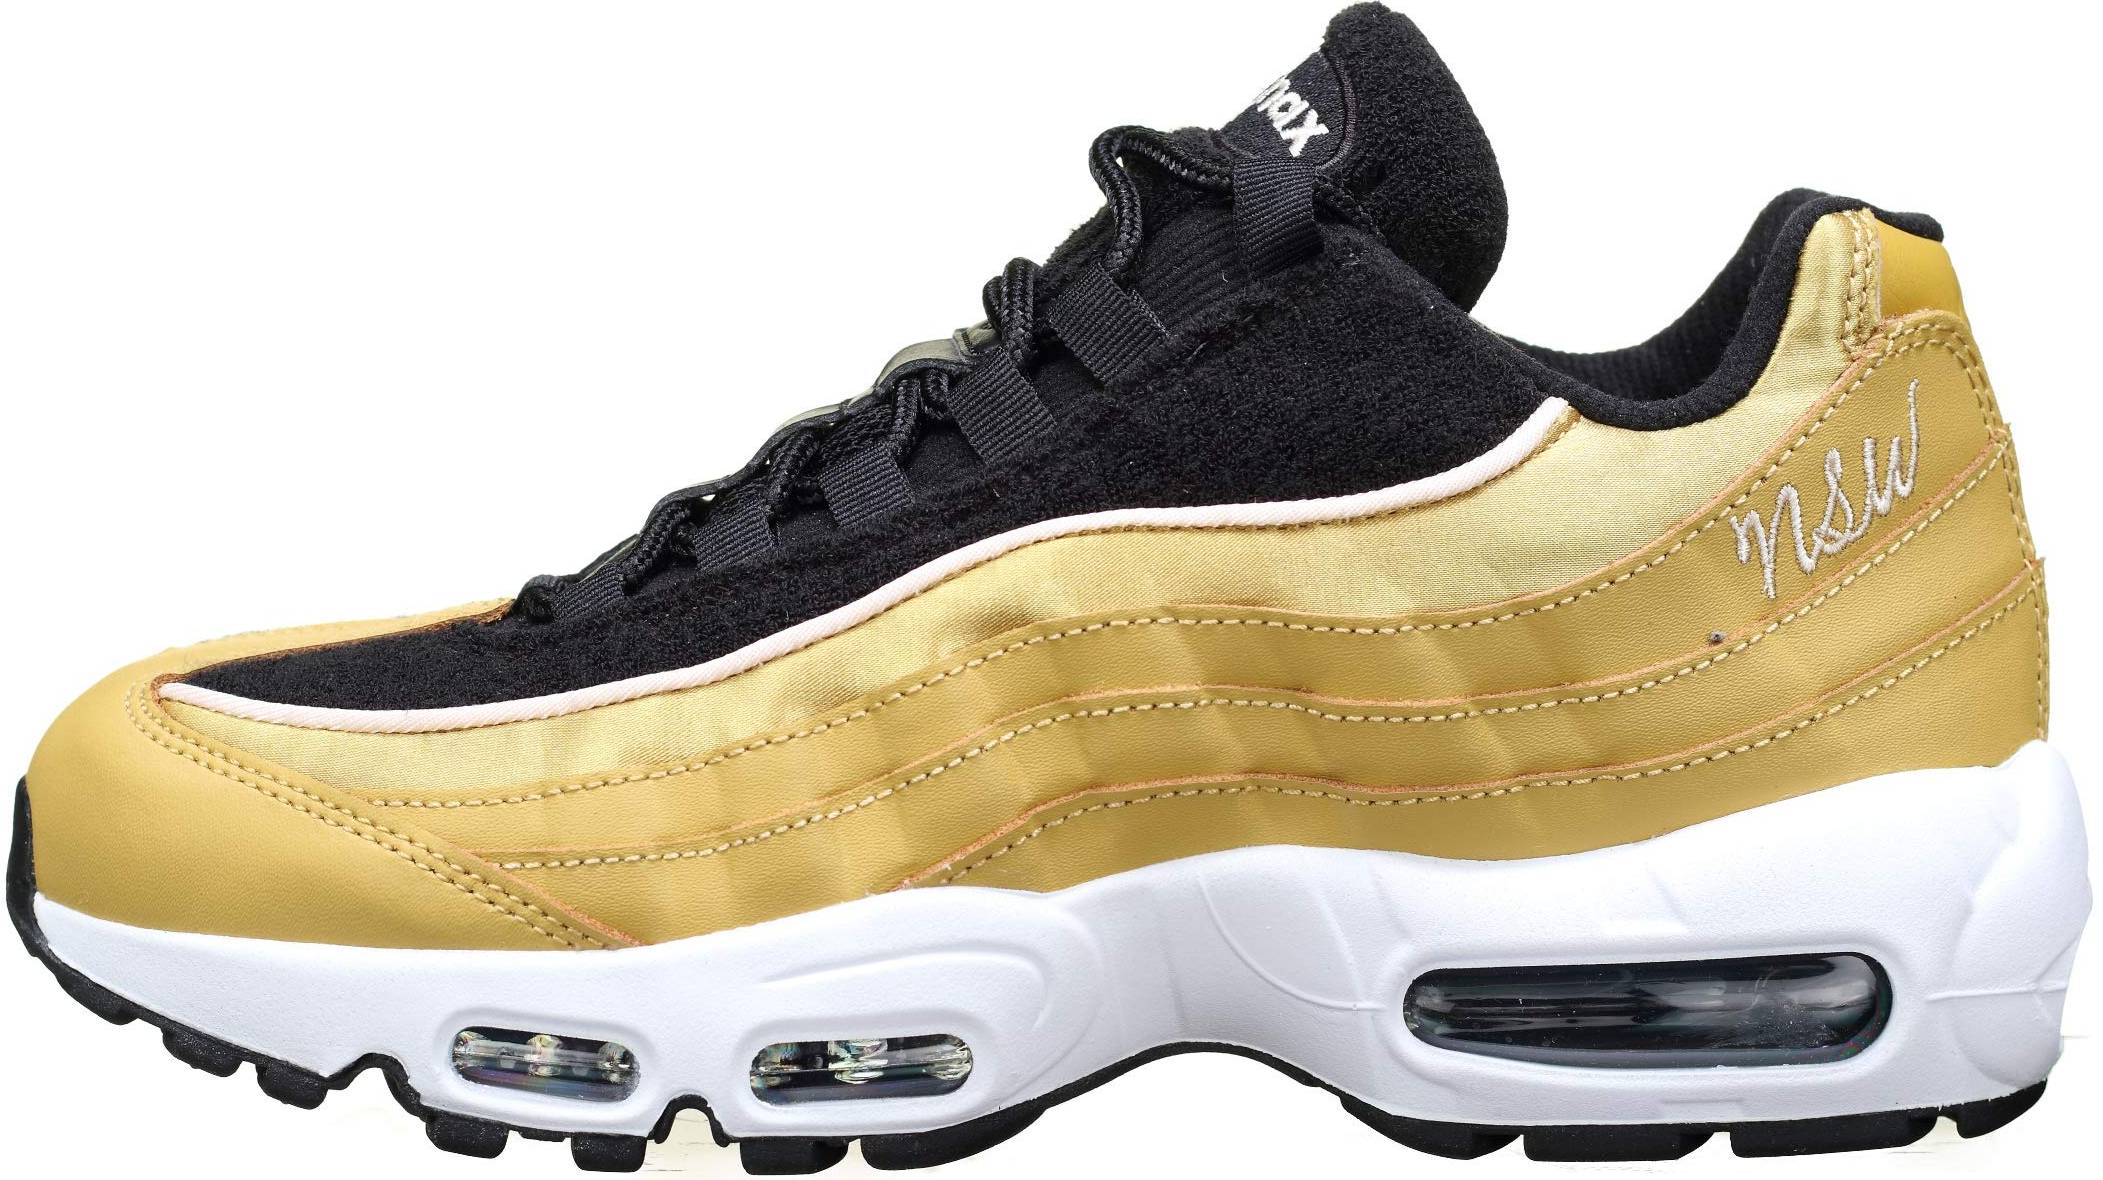 Nike Air Max 95 LX sneakers in 5 colors (only $105) | RunRepeat